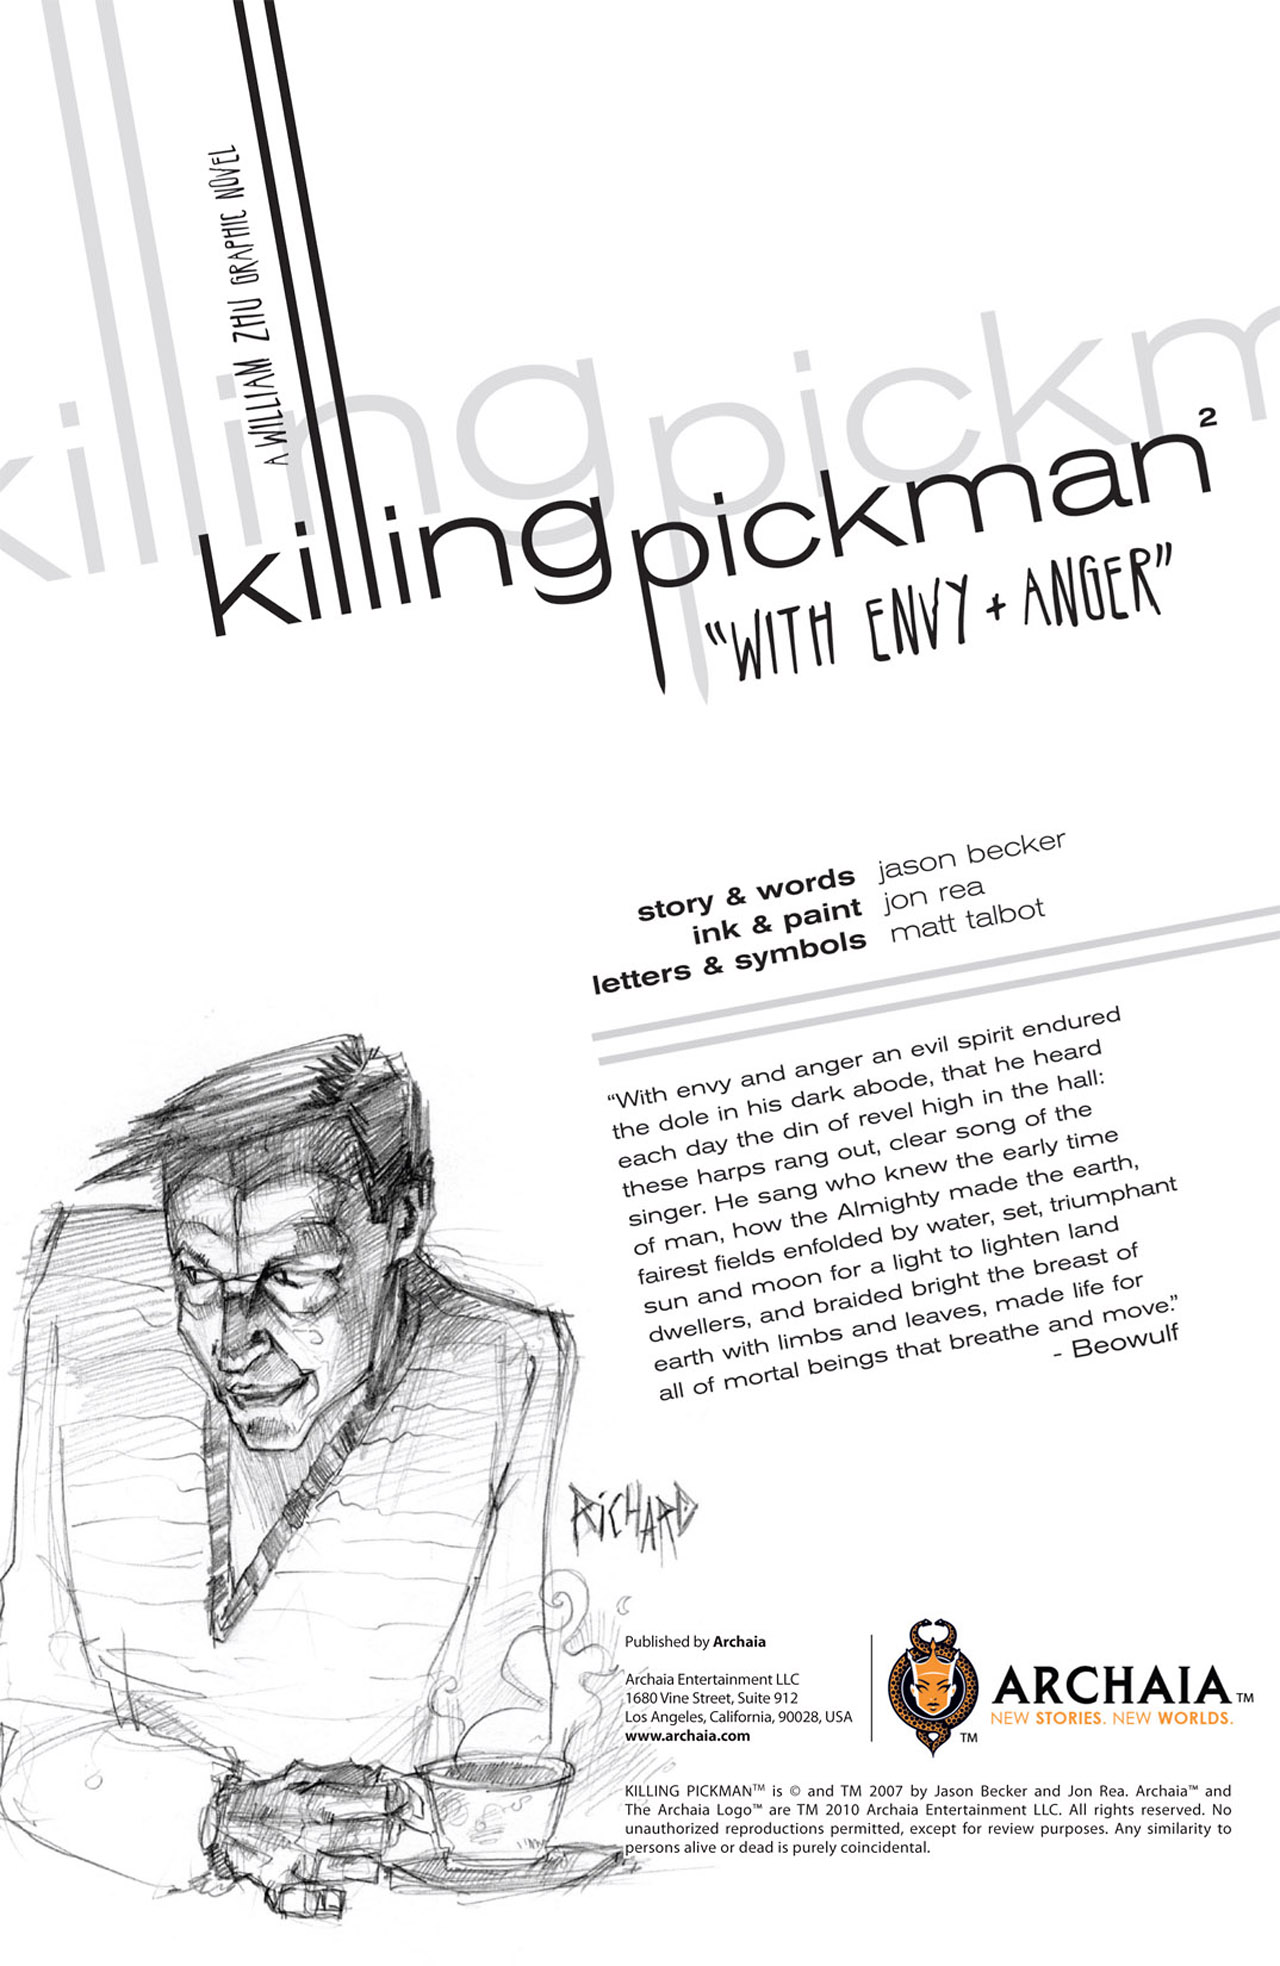 Killing Pickman 2 - With Envy  Anger